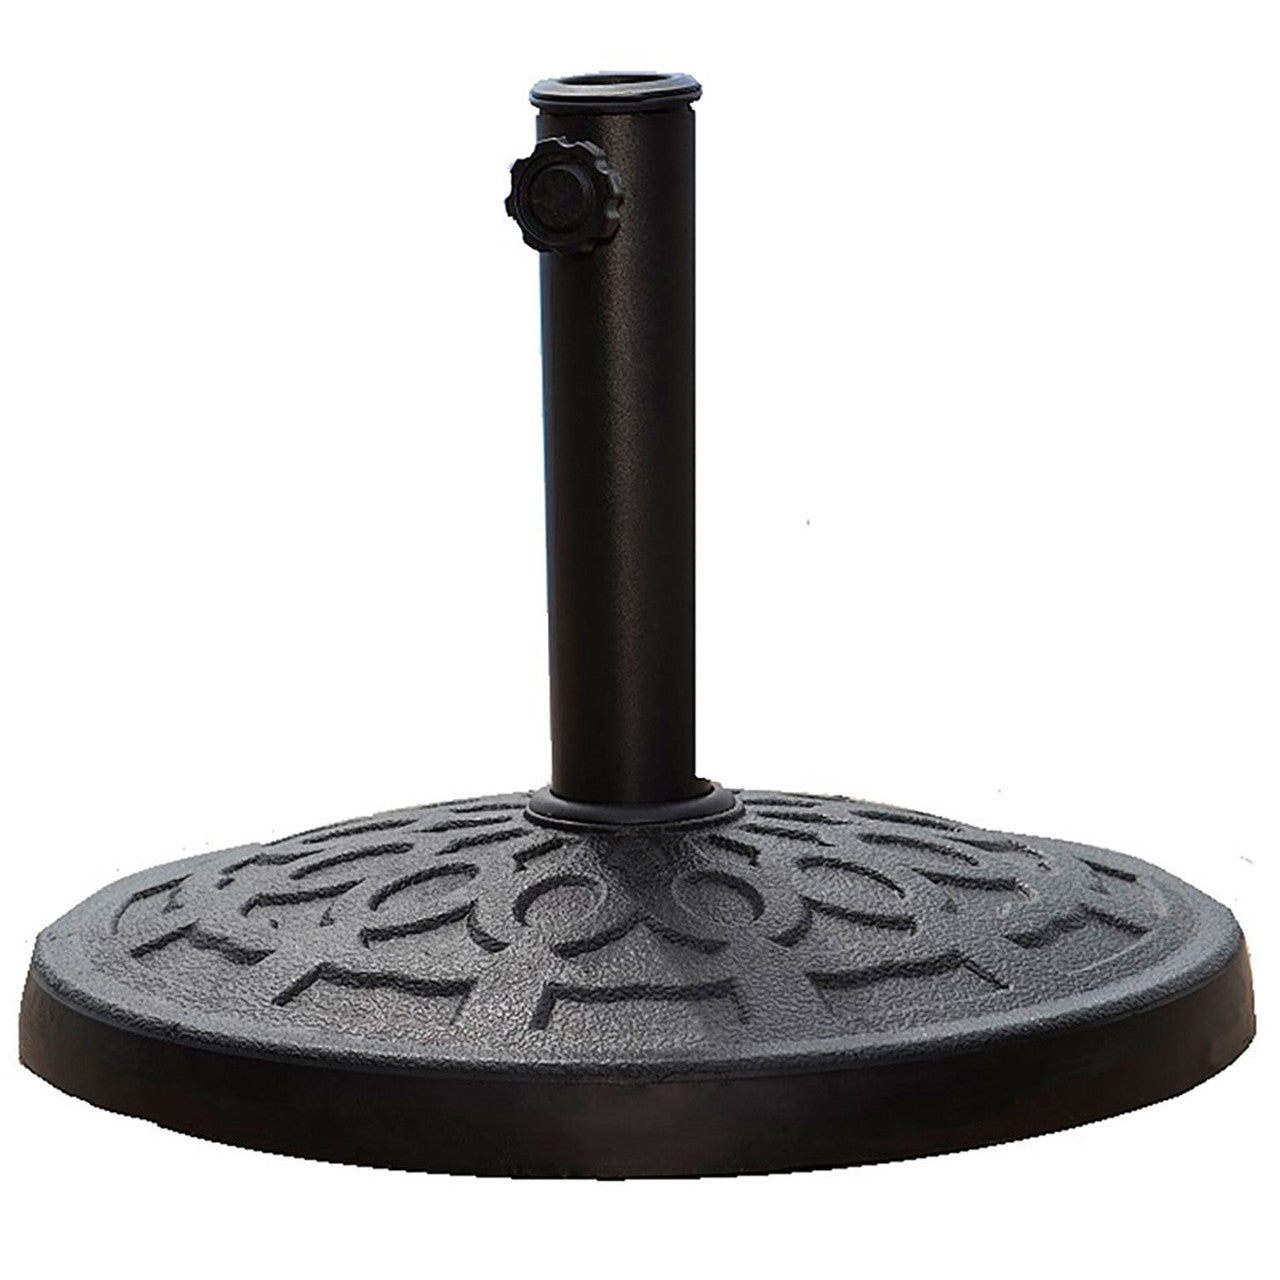 Panama Jack Resin Umbrella Base for Dining Tables - 25 lbs.